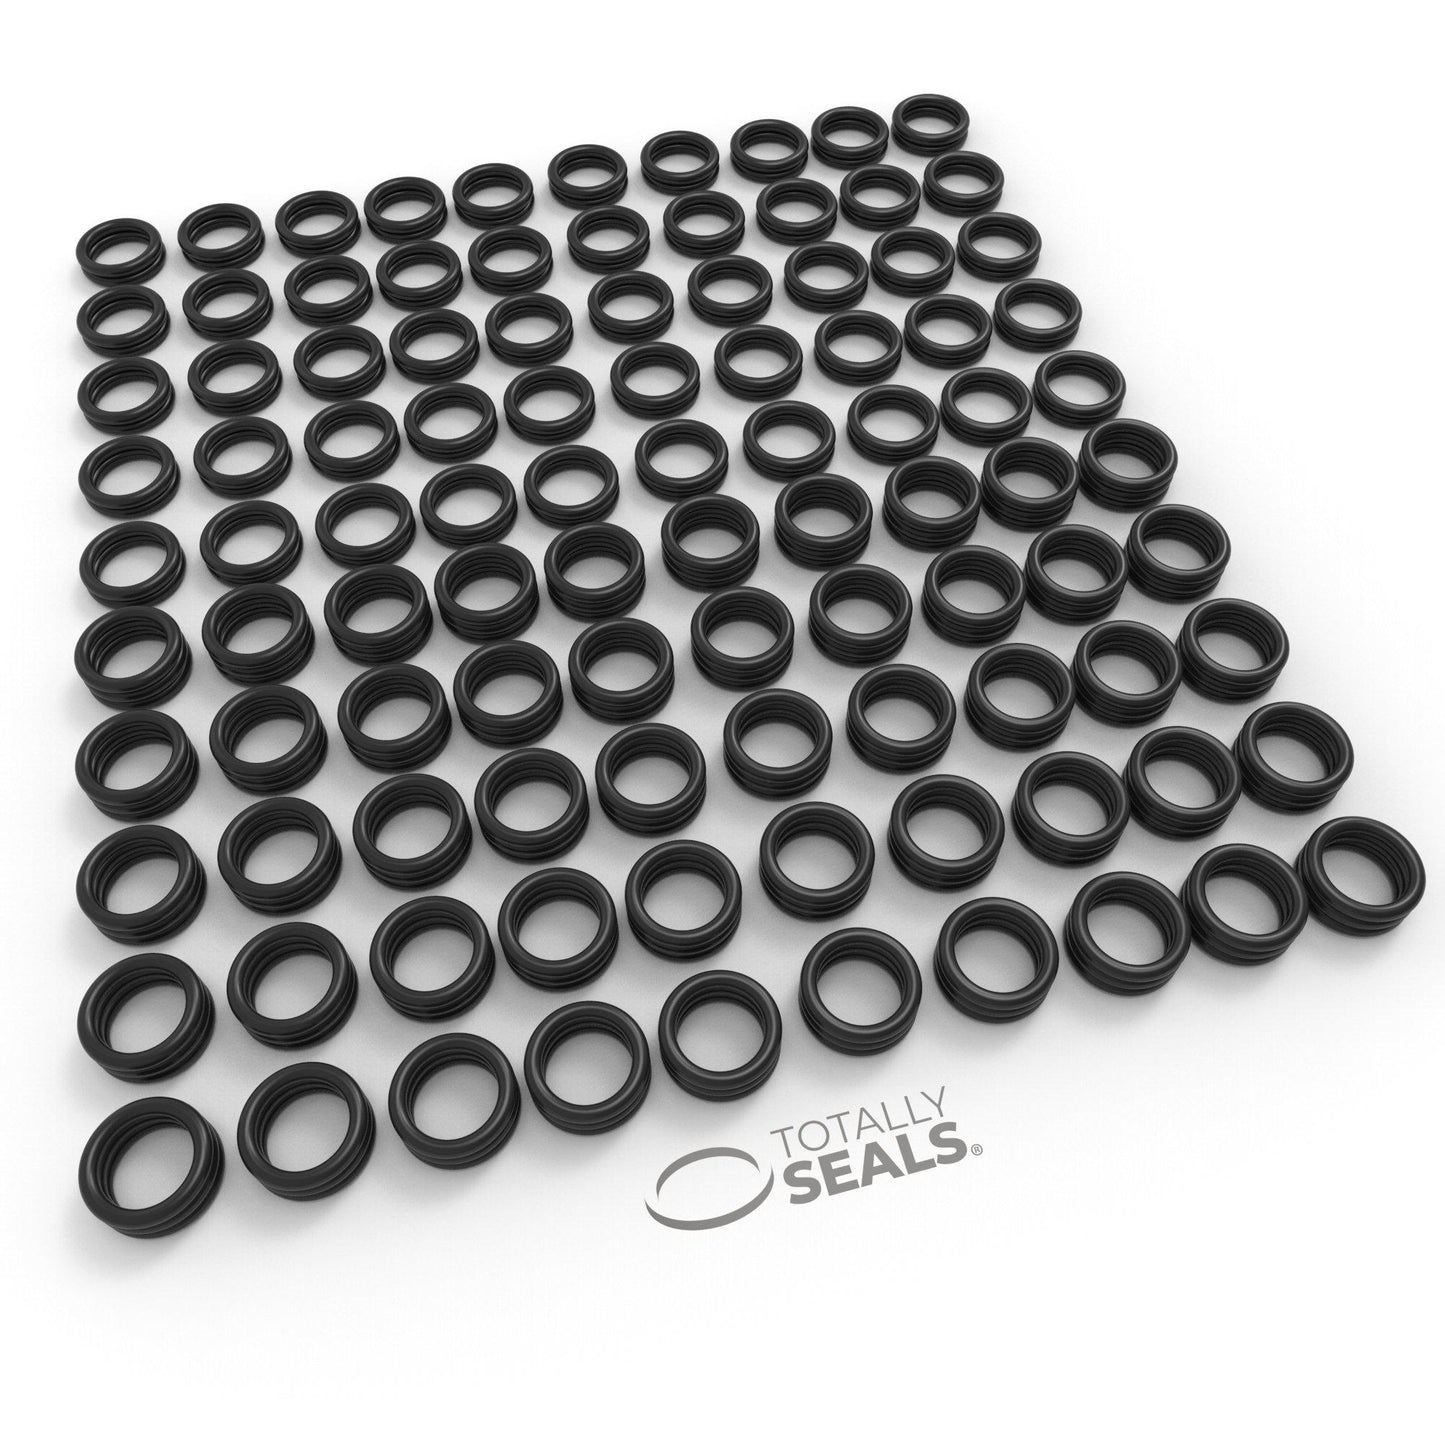 50mm x 2mm (54mm OD) Nitrile O-Rings - Totally Seals®